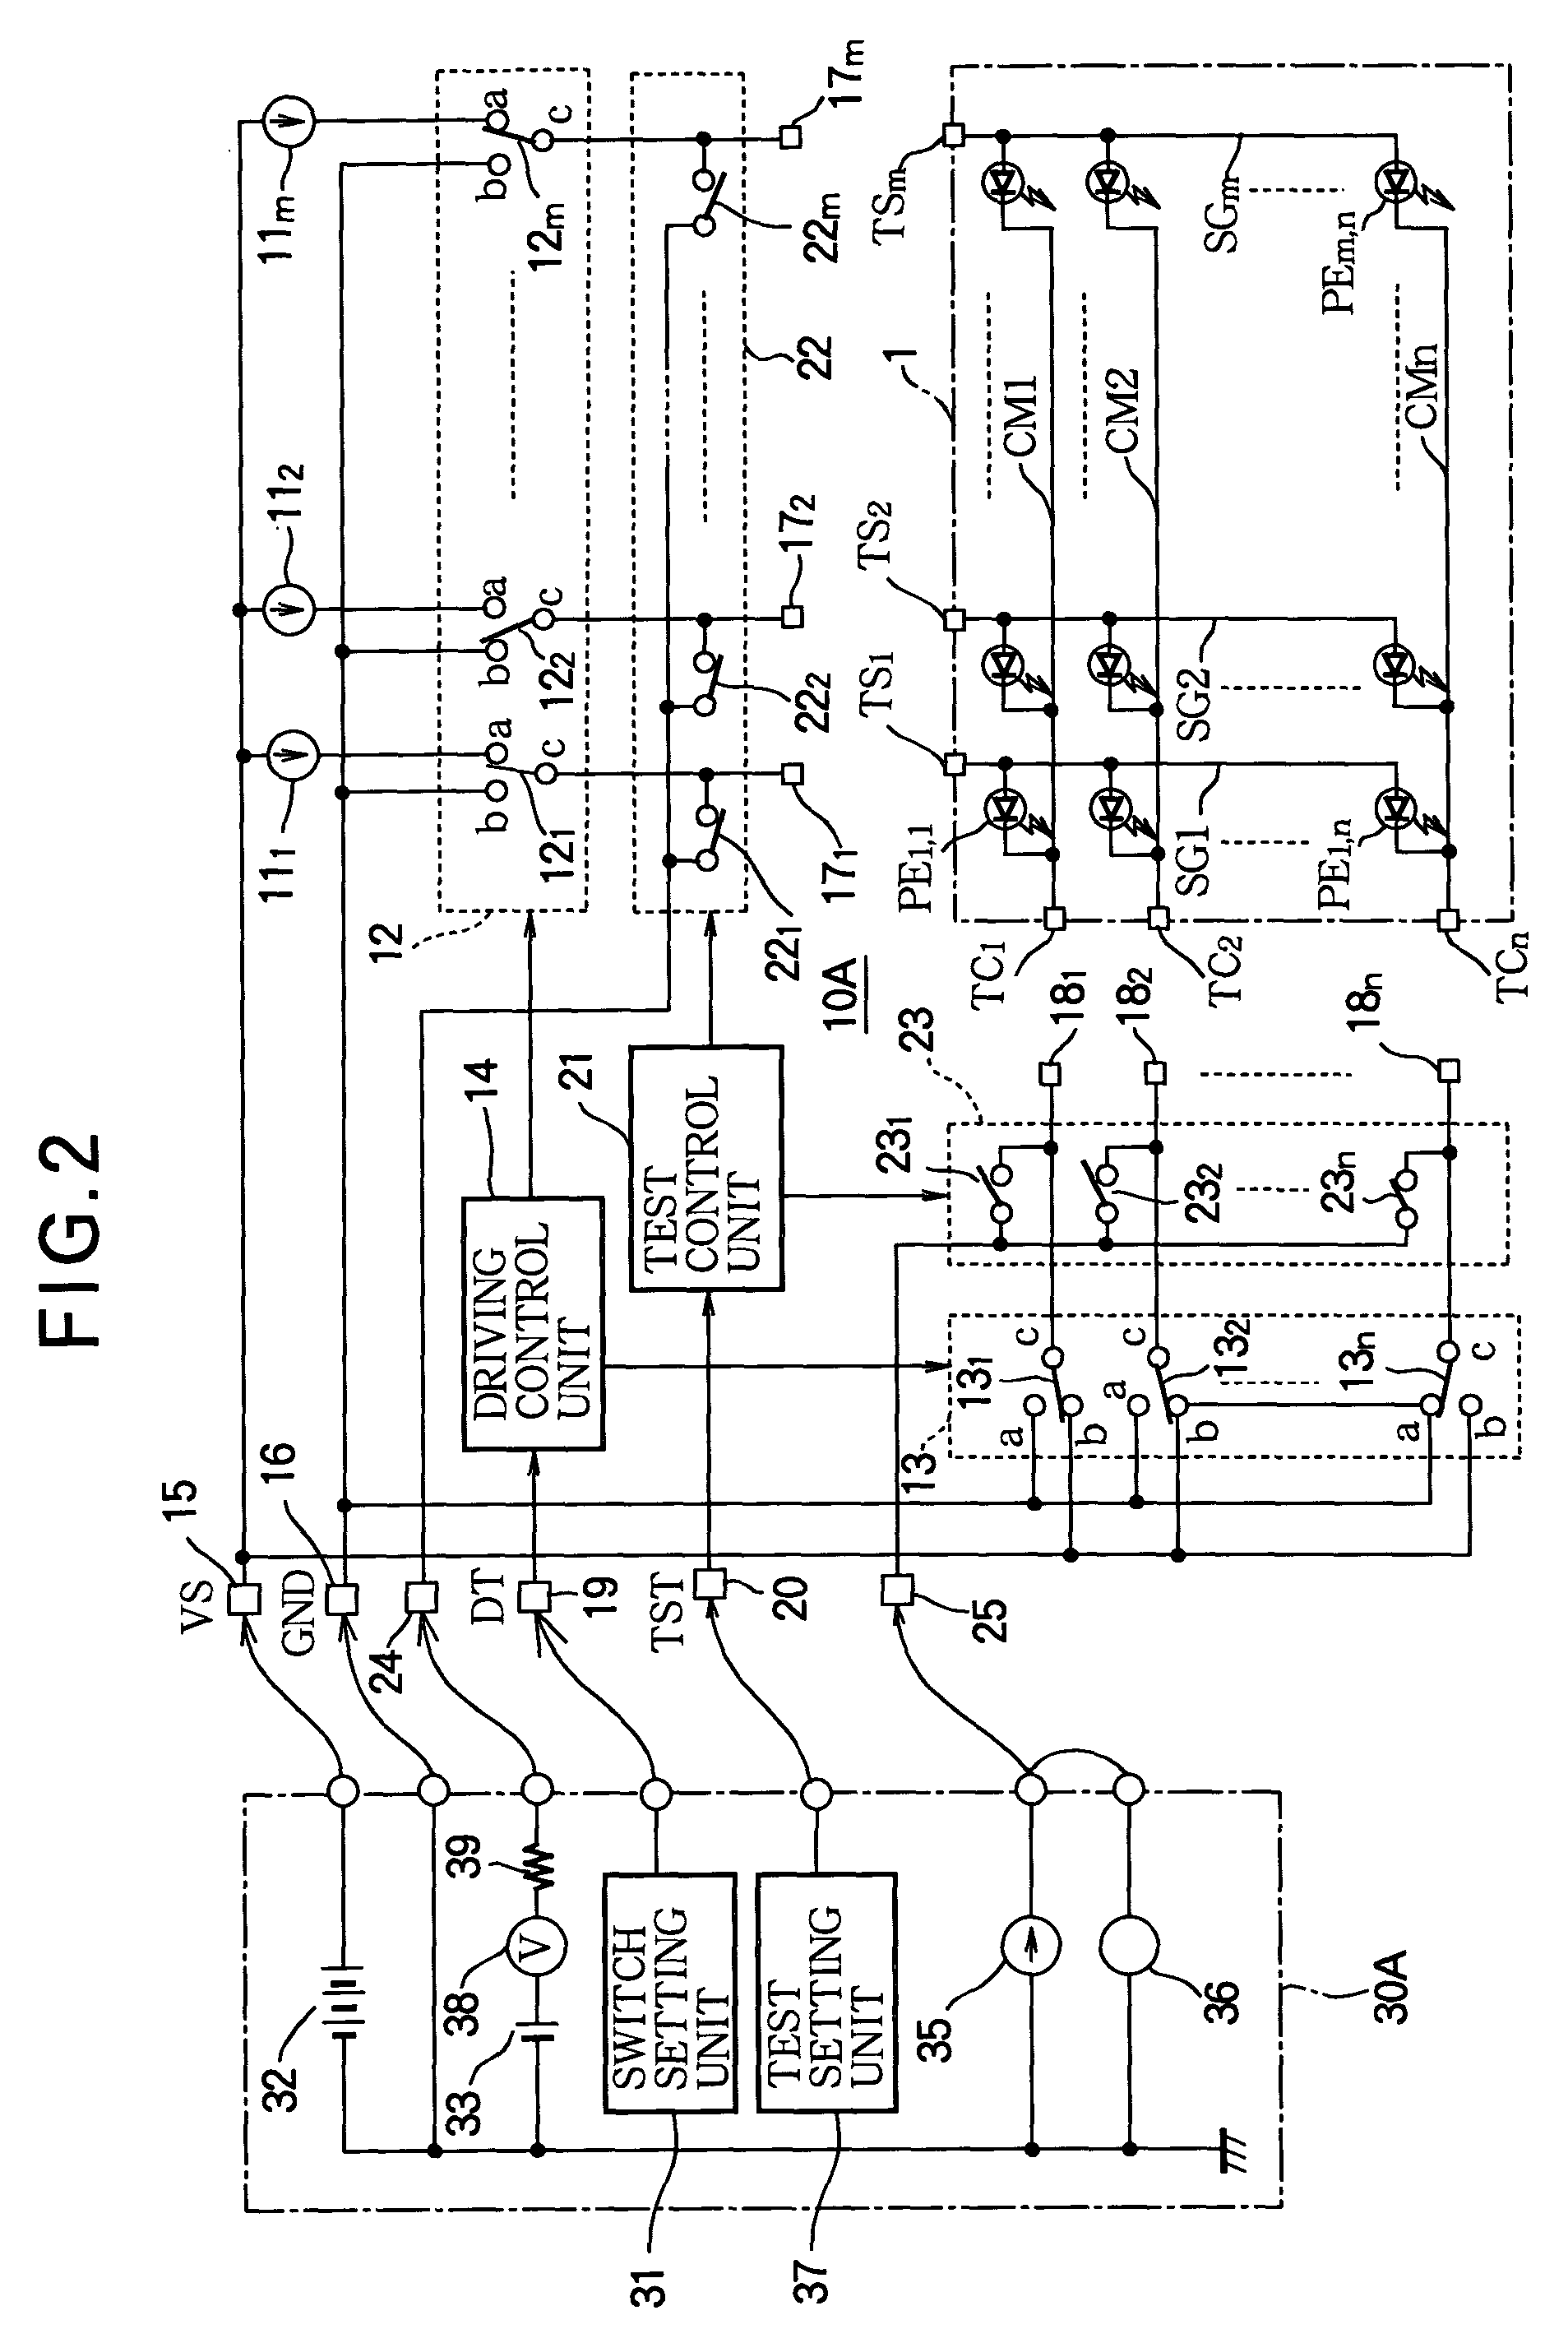 Efficiently testable display driving circuit